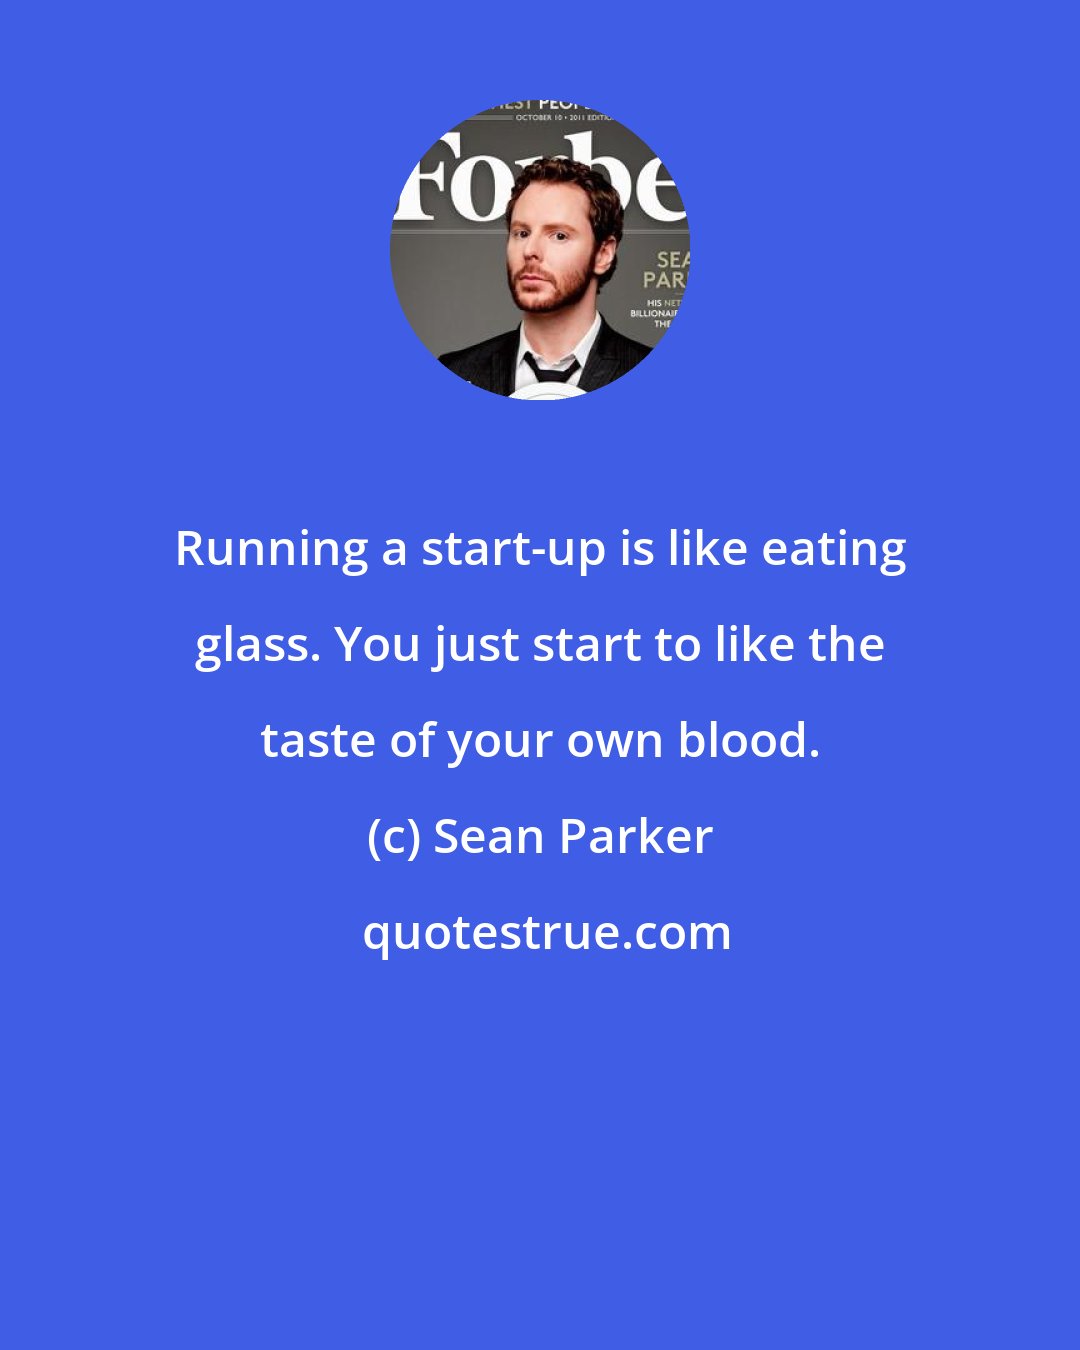 Sean Parker: Running a start-up is like eating glass. You just start to like the taste of your own blood.